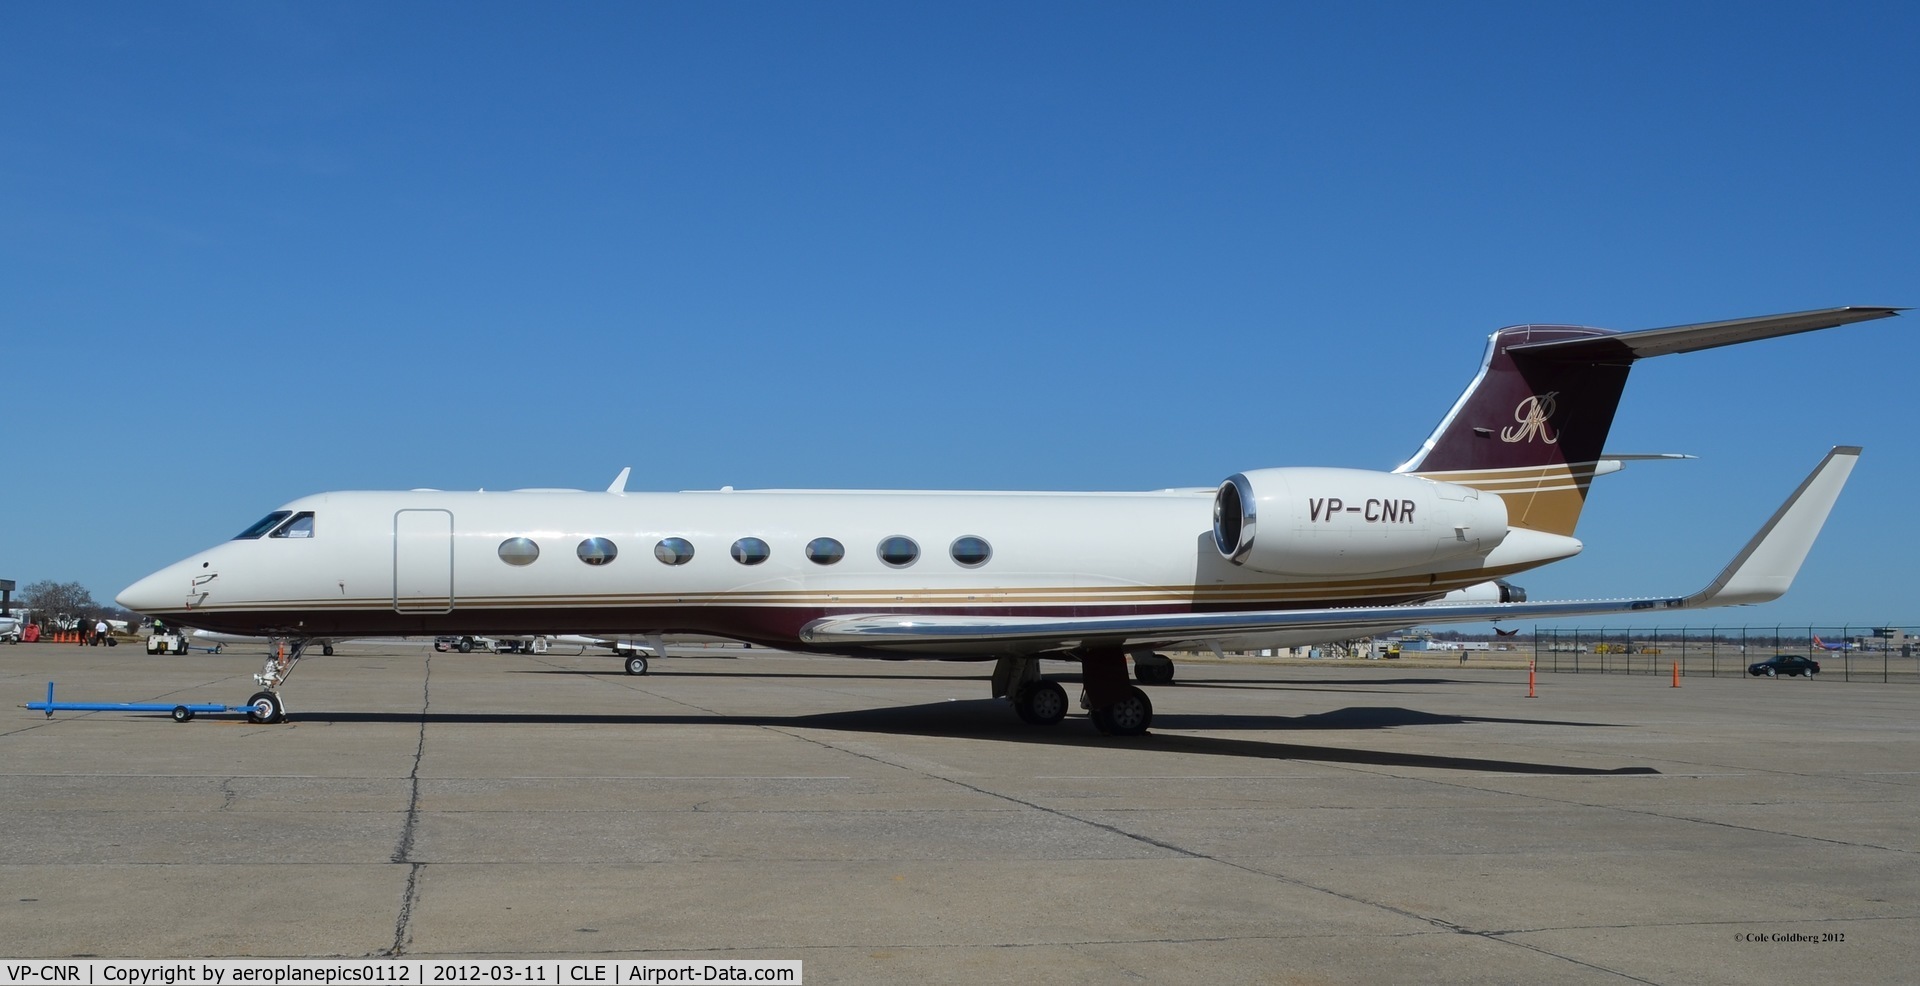 VP-CNR, 2006 Gulfstream Aerospace GV-SP (G550) C/N 5113, VP-CNR seen parked at Atlantic Aviation's hangars at KCLE. In, along with other planes, for the Saudi Arabian Crown Prince Nayef bin Abdul-Aziz Al Saud's visit to the Cleveland Clinic.